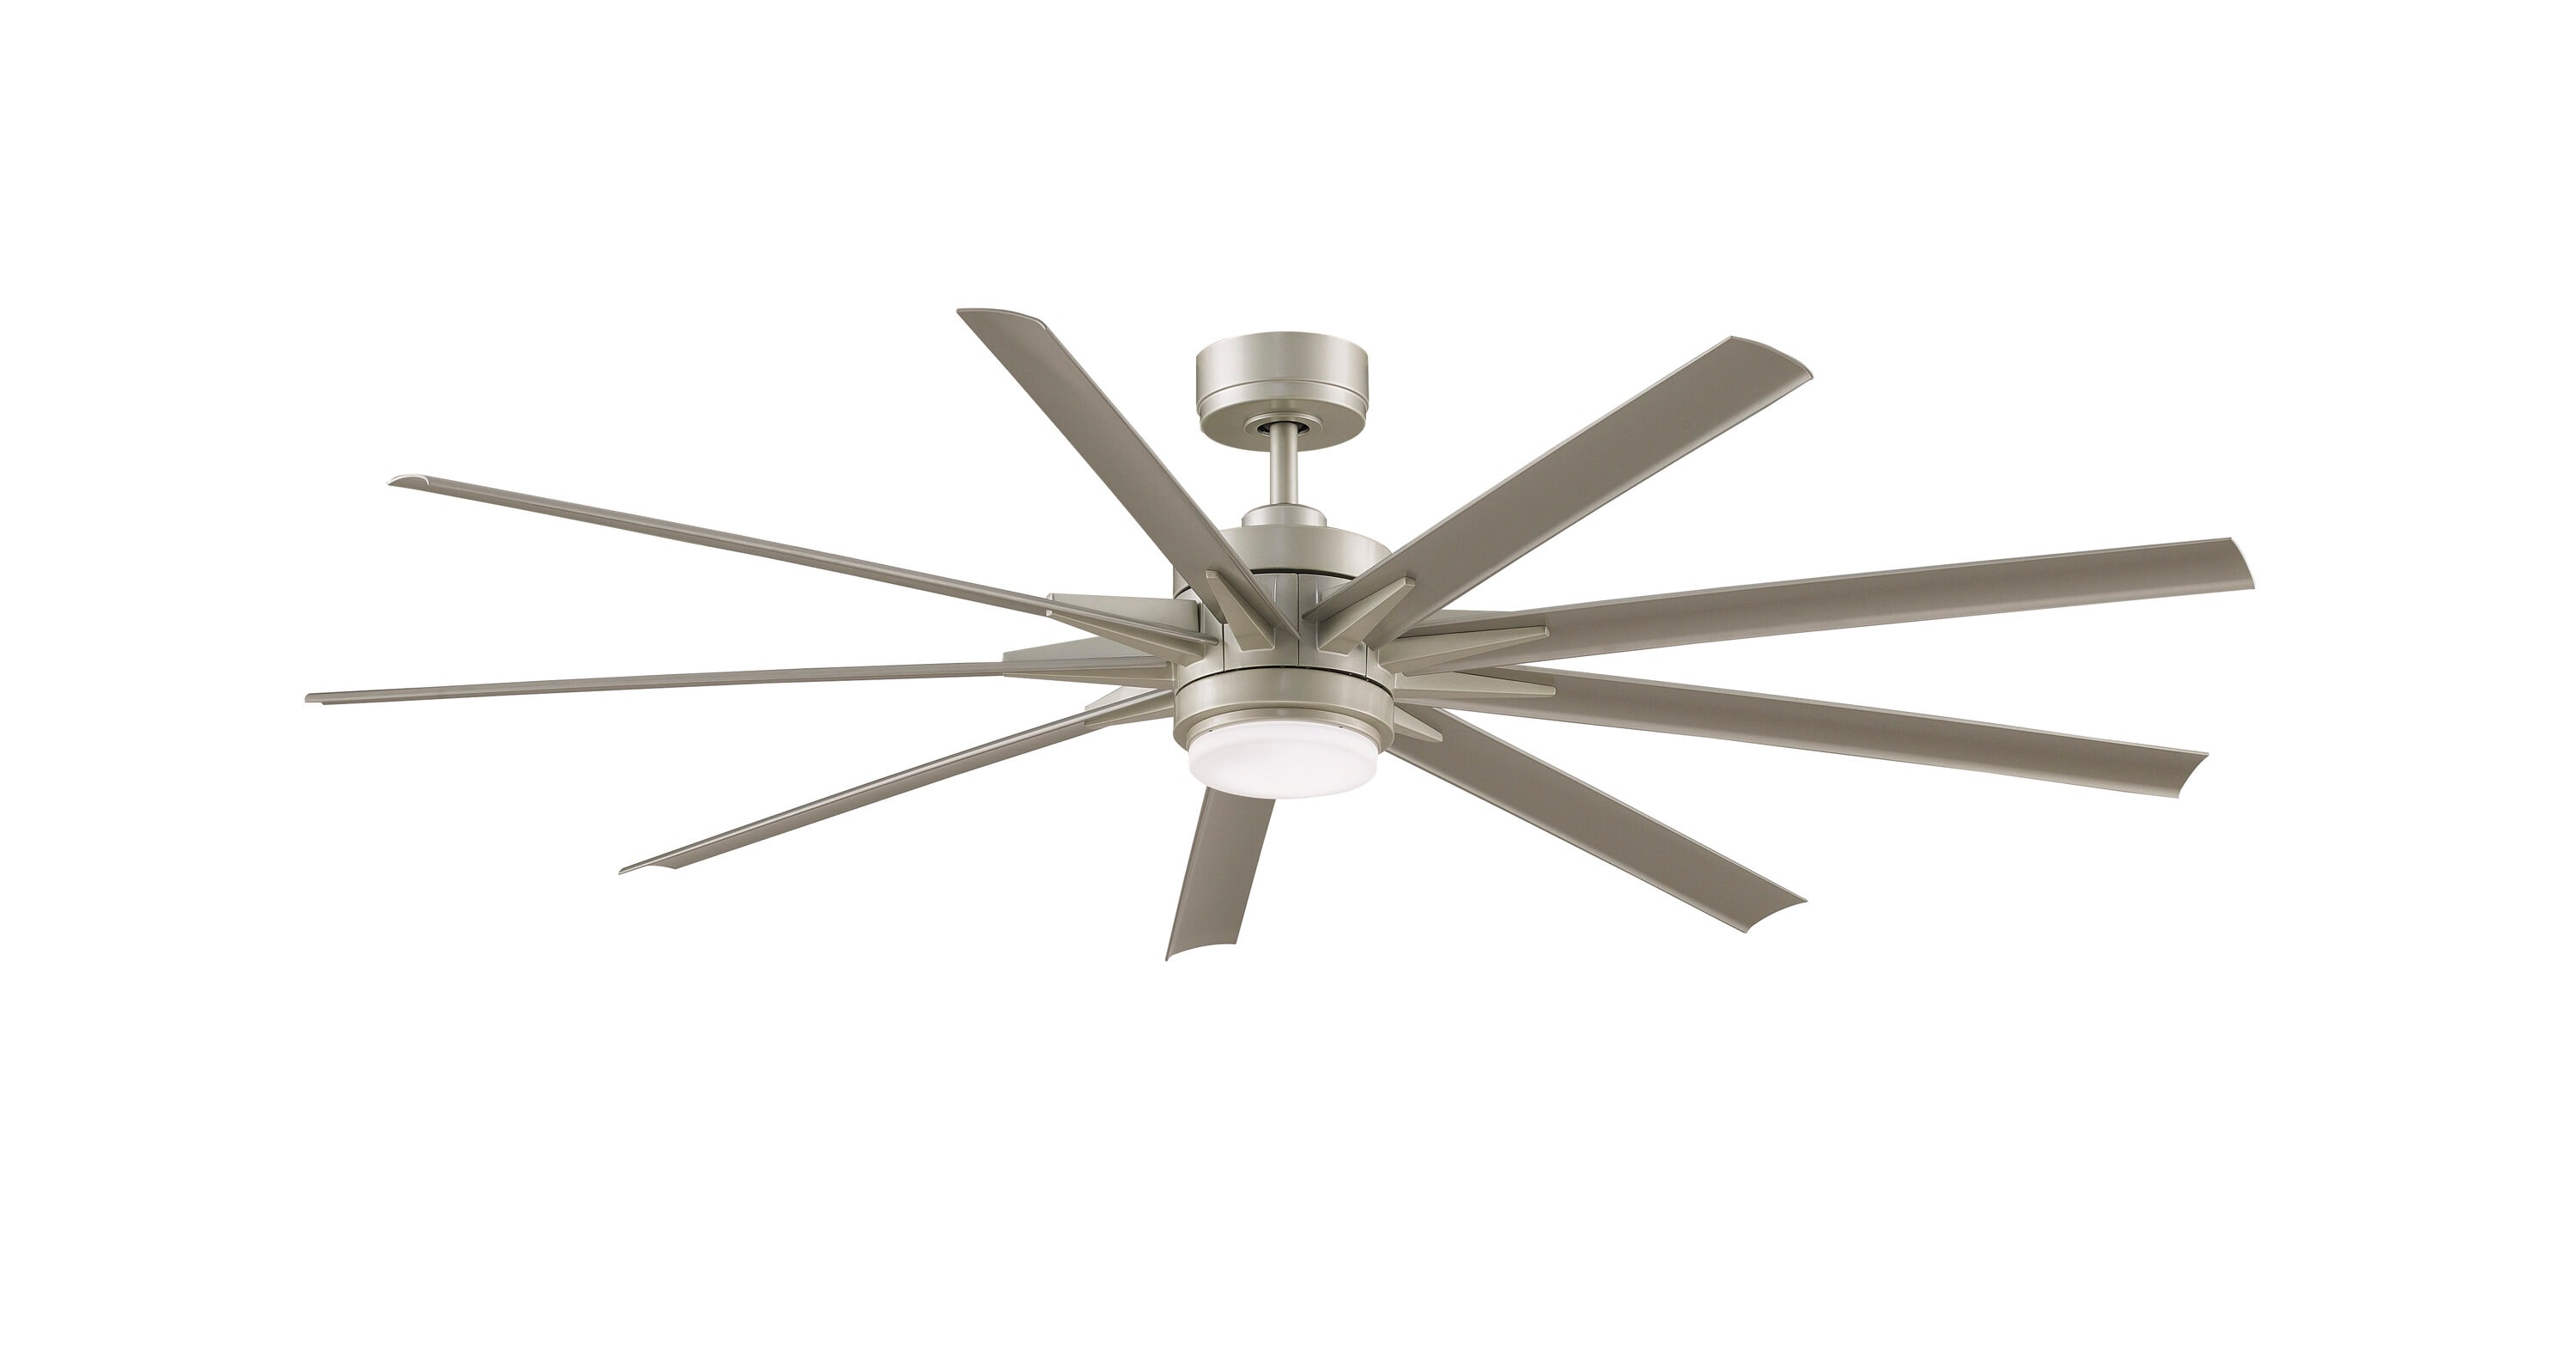 Odyn Custom 72-in Brushed Nickel Color-changing LED Indoor/Outdoor Smart Ceiling Fan with Light Remote (9-Blade) Walnut | - Fanimation FPD8152BNW-72BNW